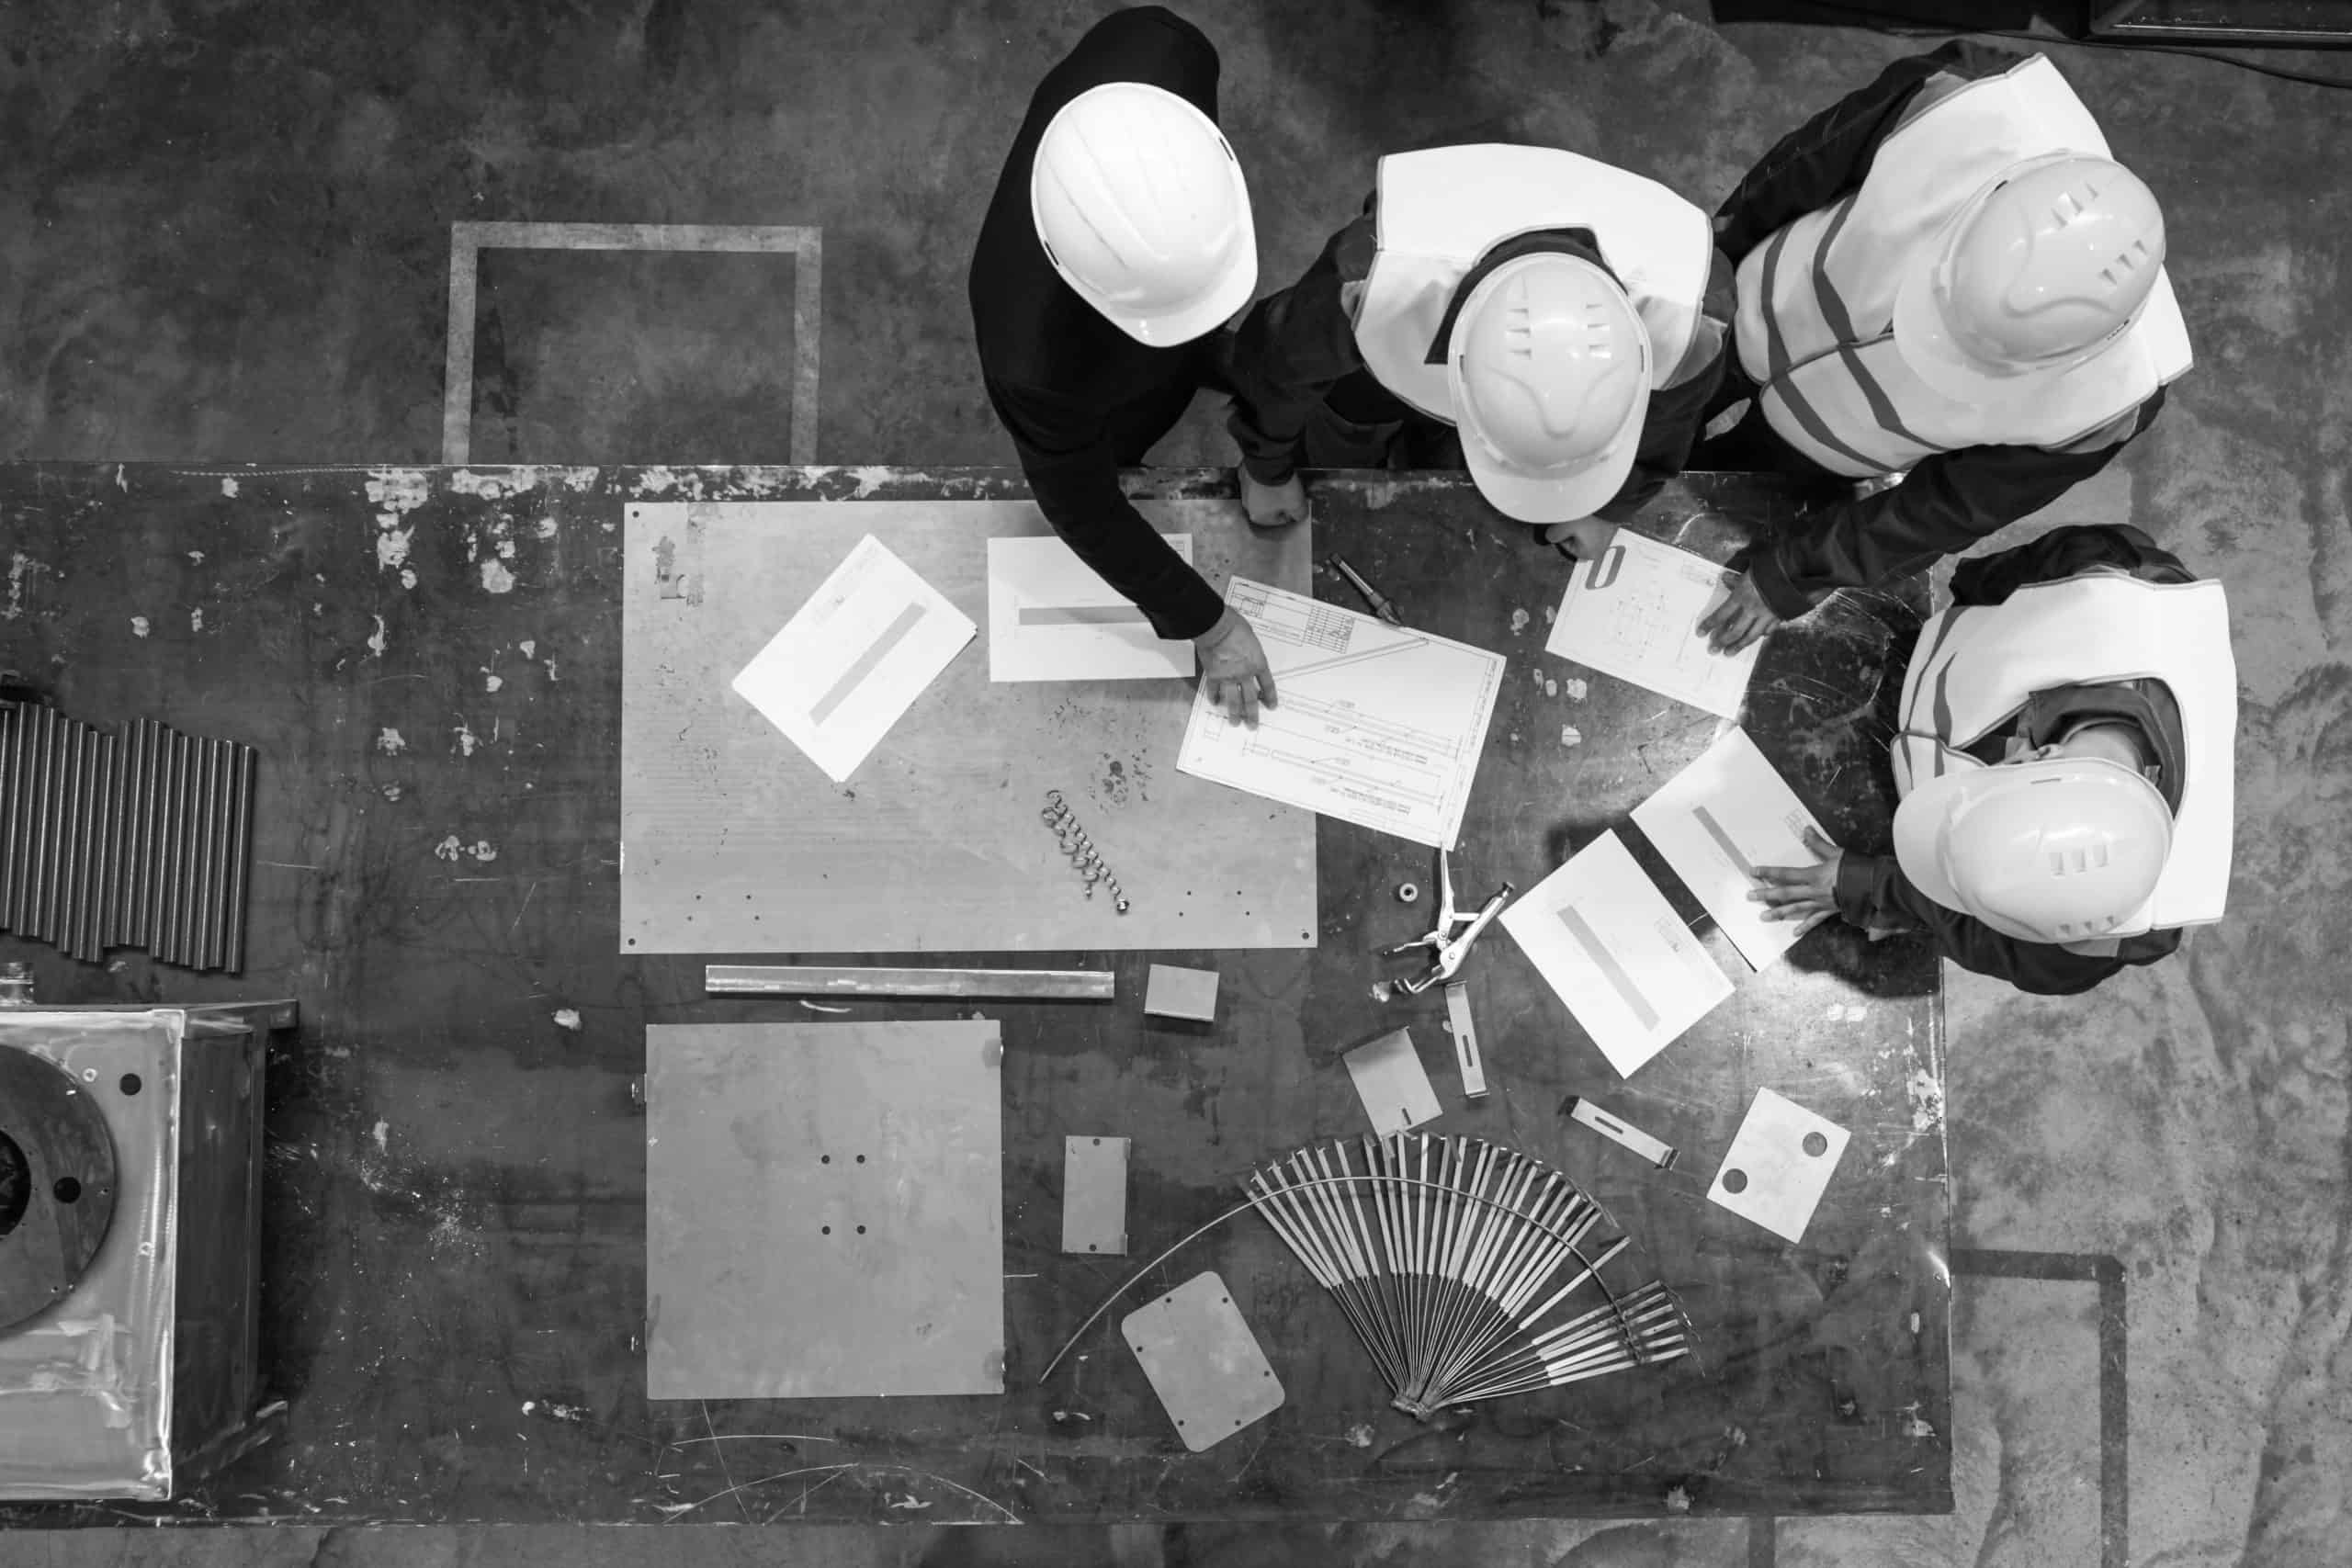 Workers and manager in safety helmets working with documents at factory table